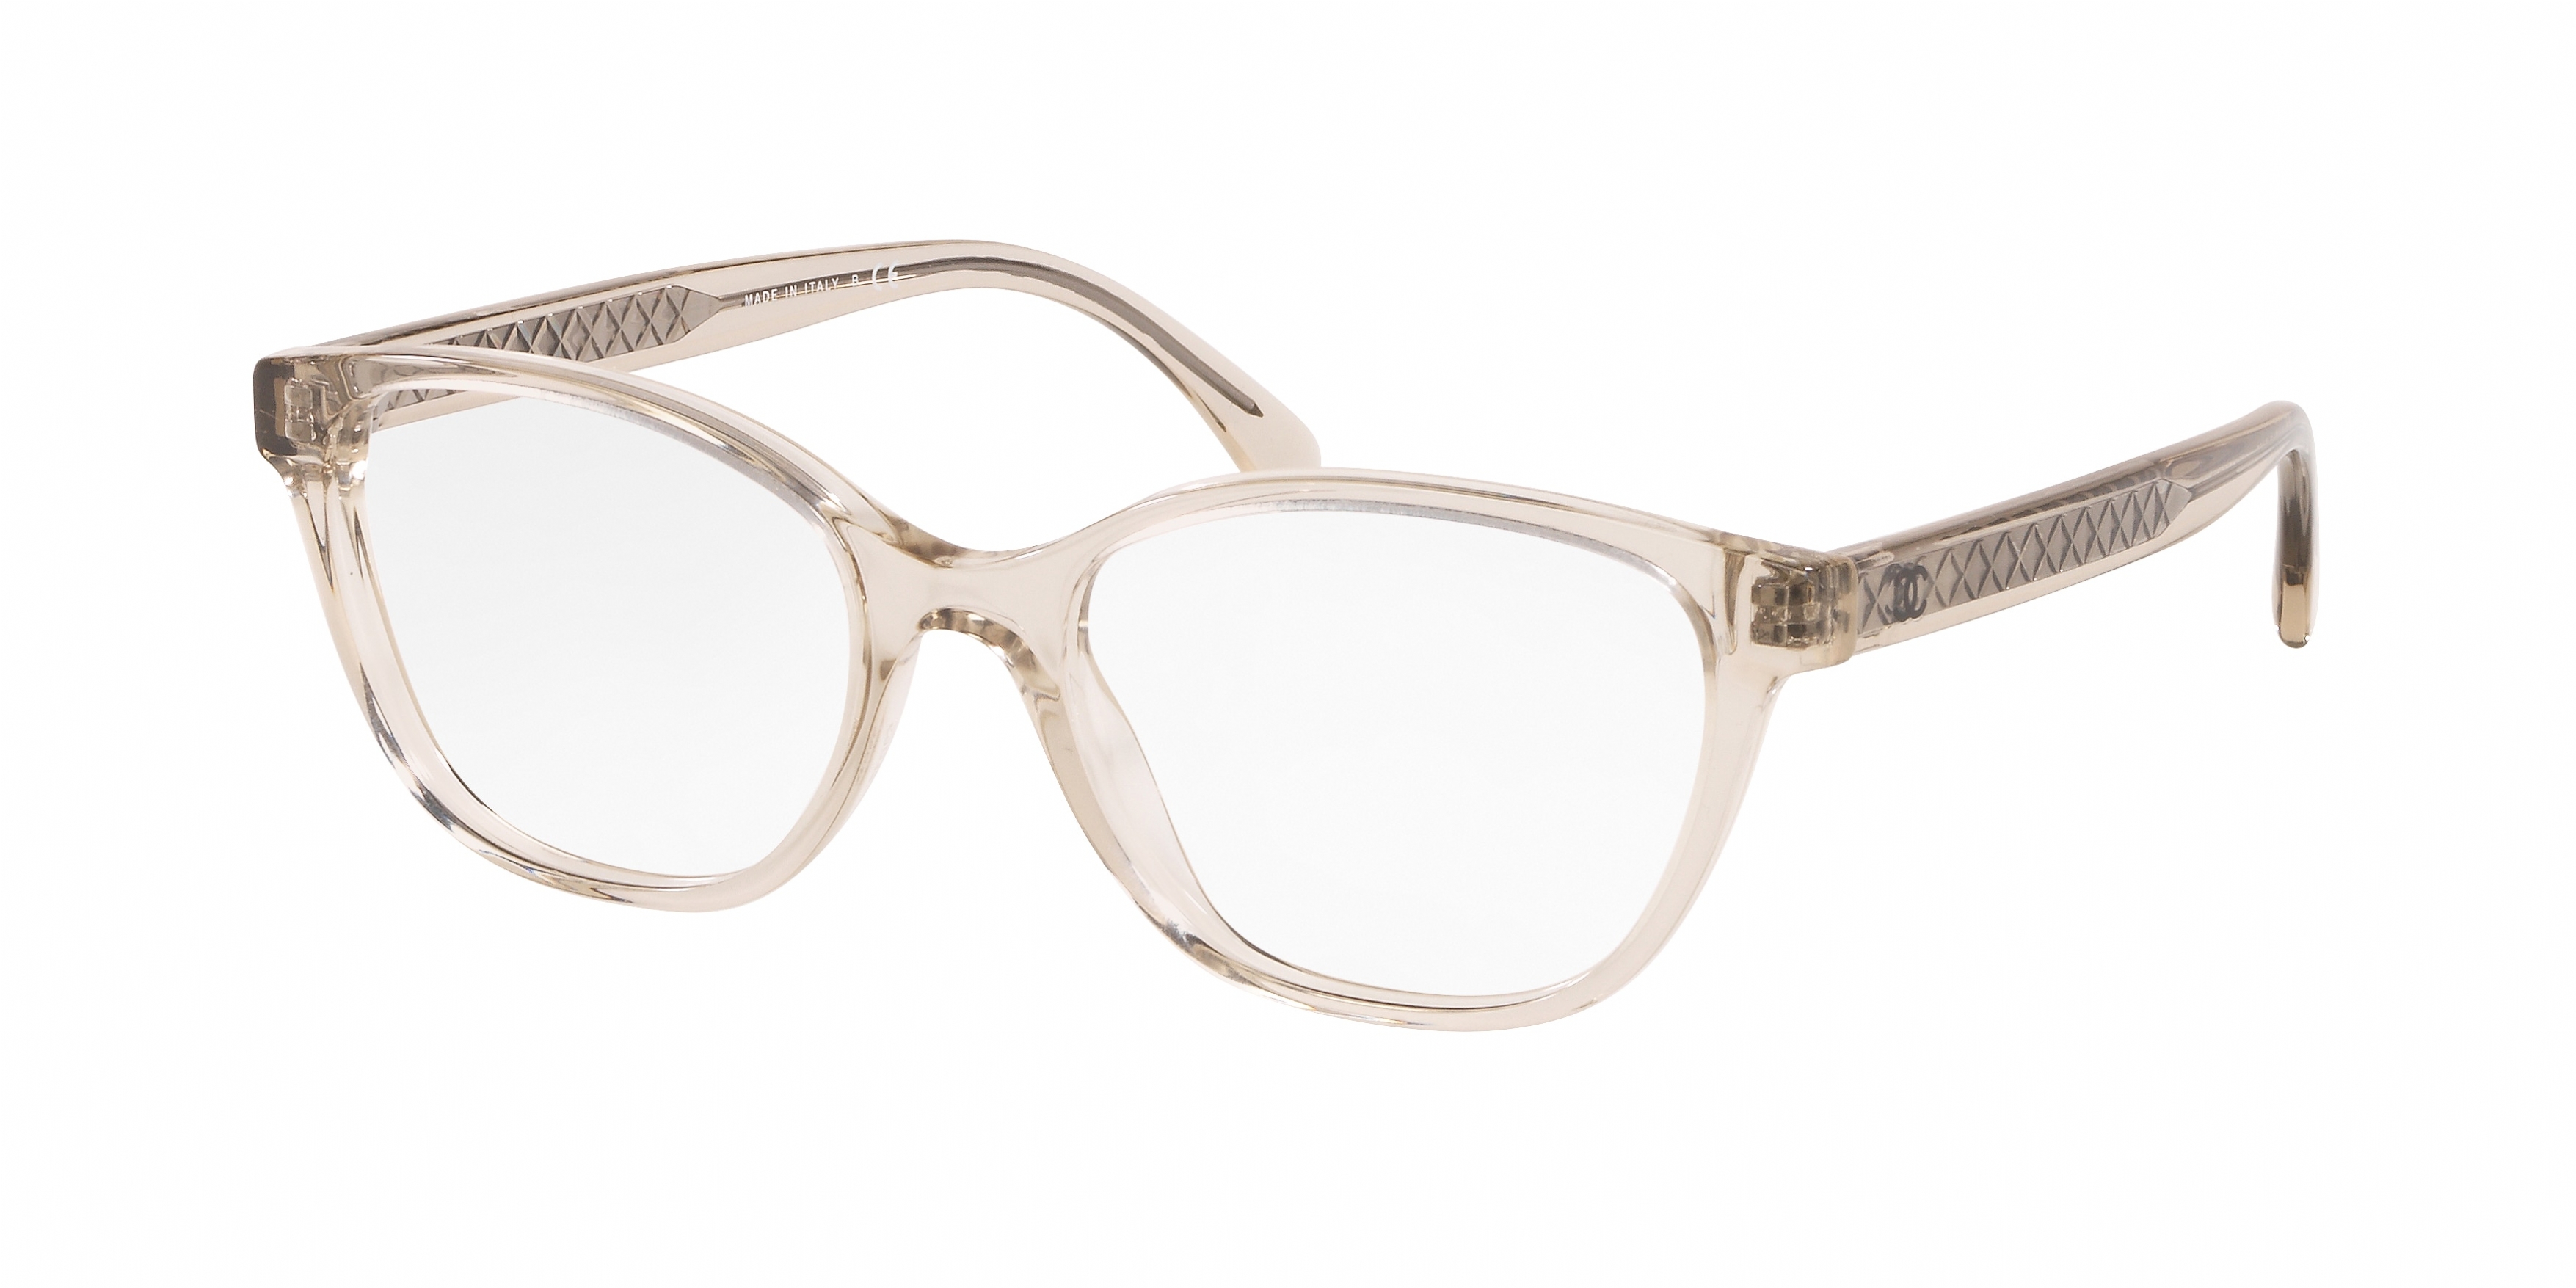 Buy Chanel Eyeglasses directly from